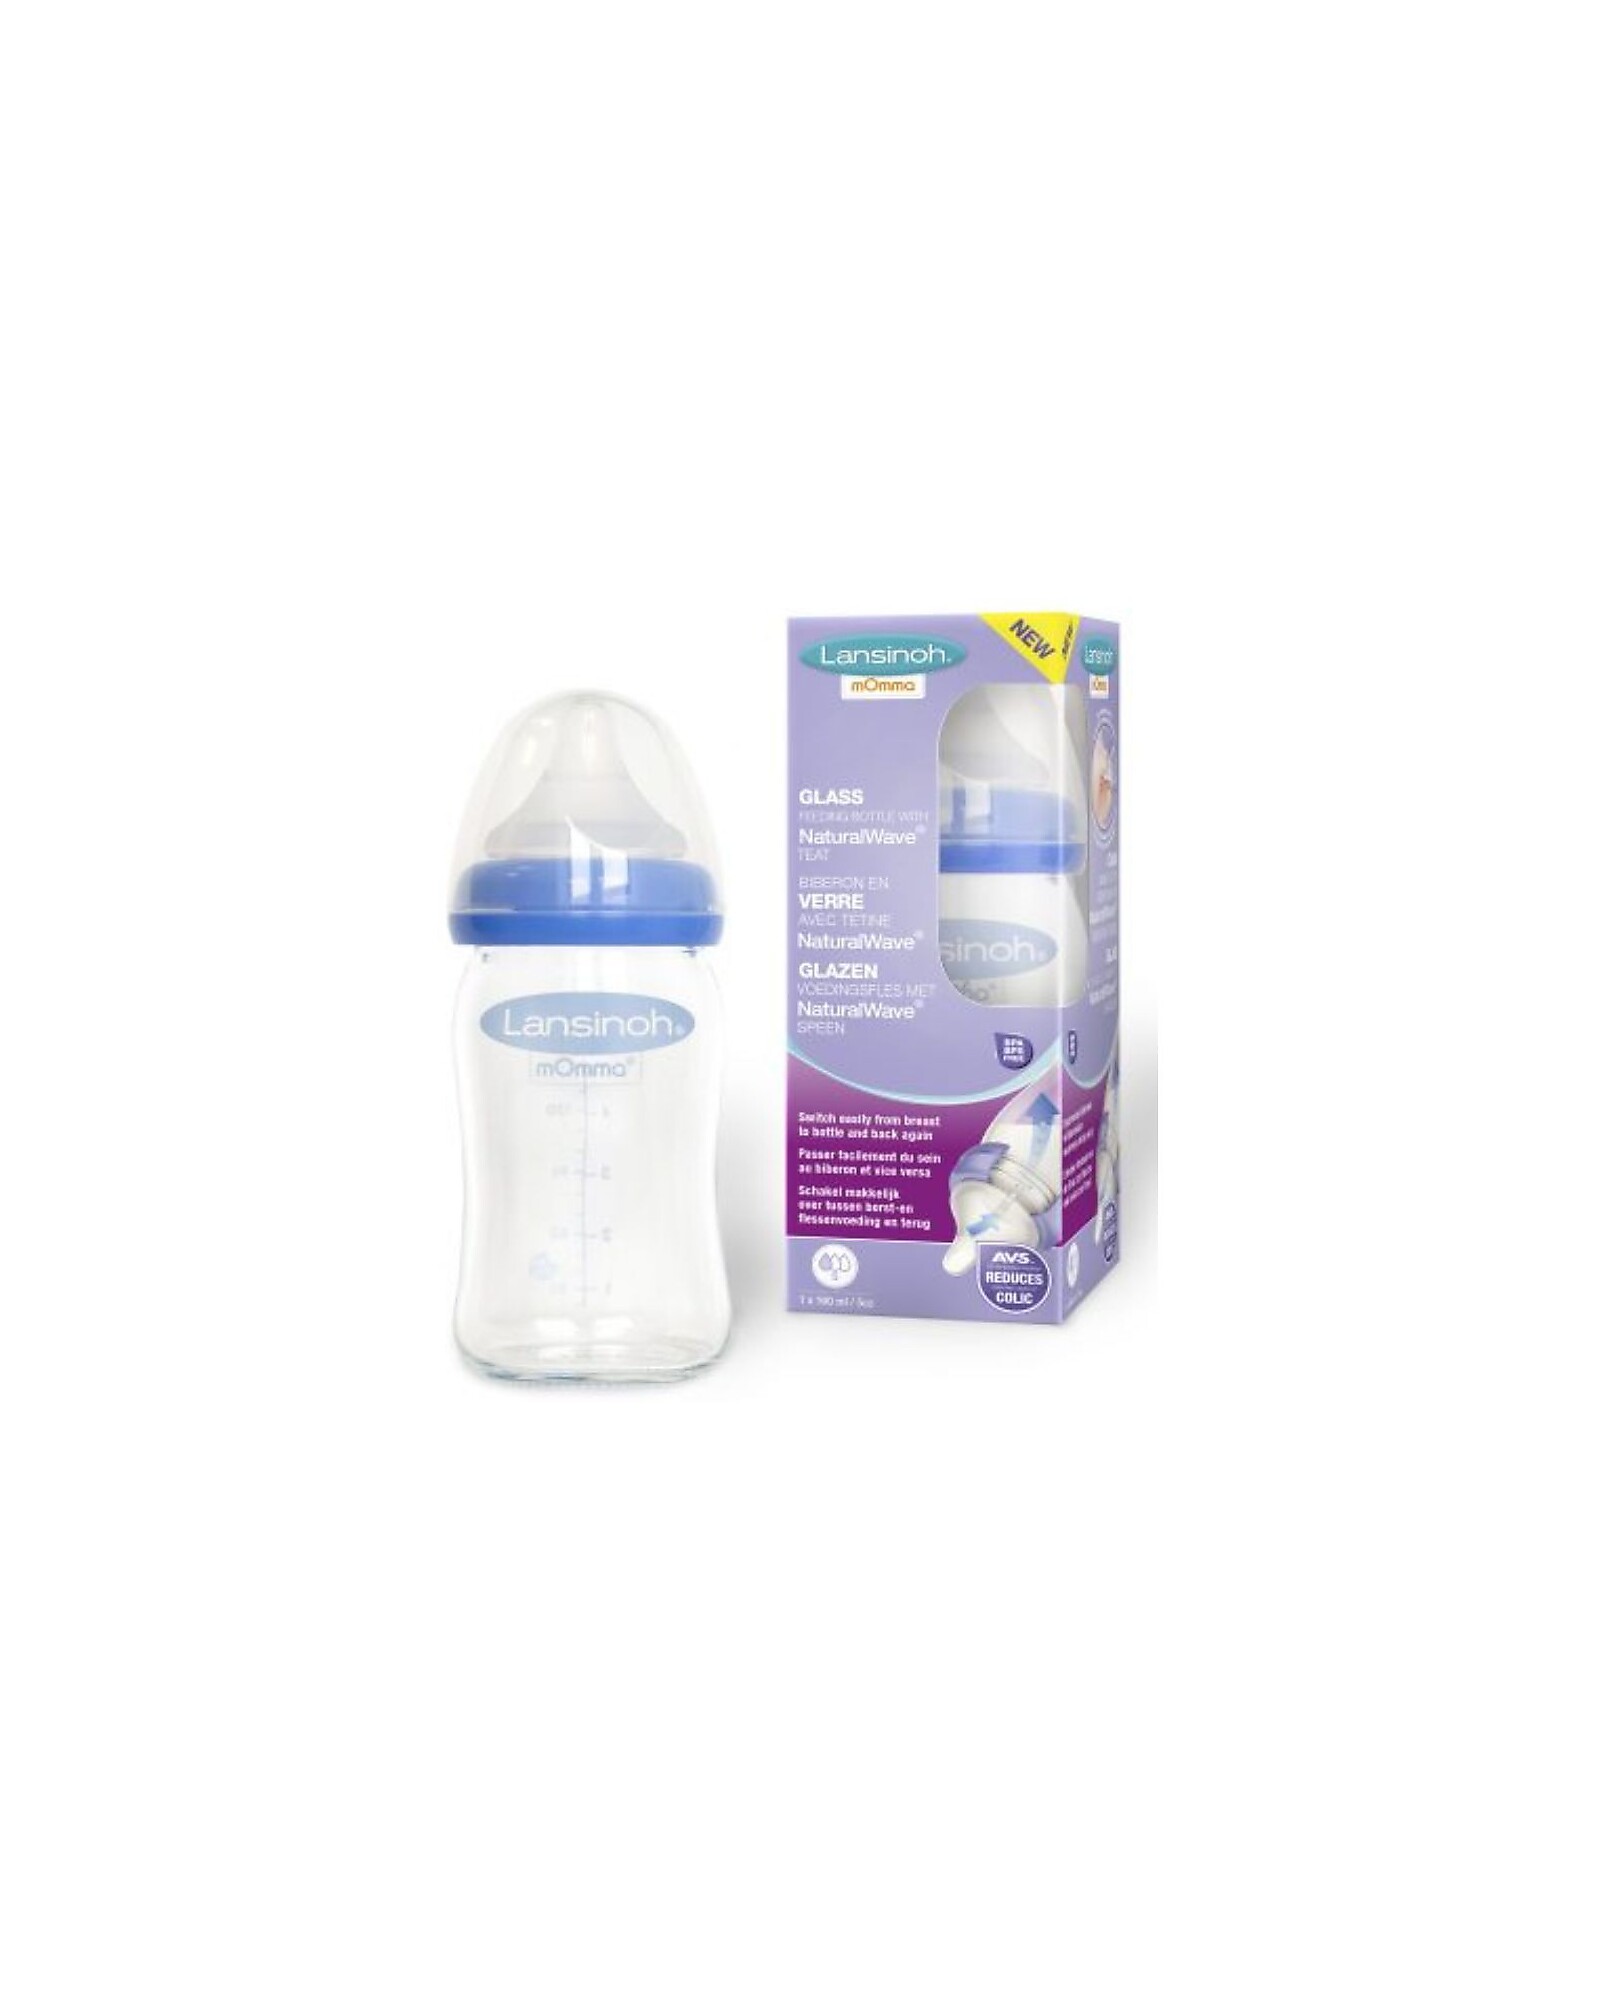 https://data.family-nation.com/imgprodotto/lansinoh-glass-baby-bottle-natural-wave-teat-160-ml-from-birth-bpa-and-bps-free-baby-bottles_478771_zoom.jpg